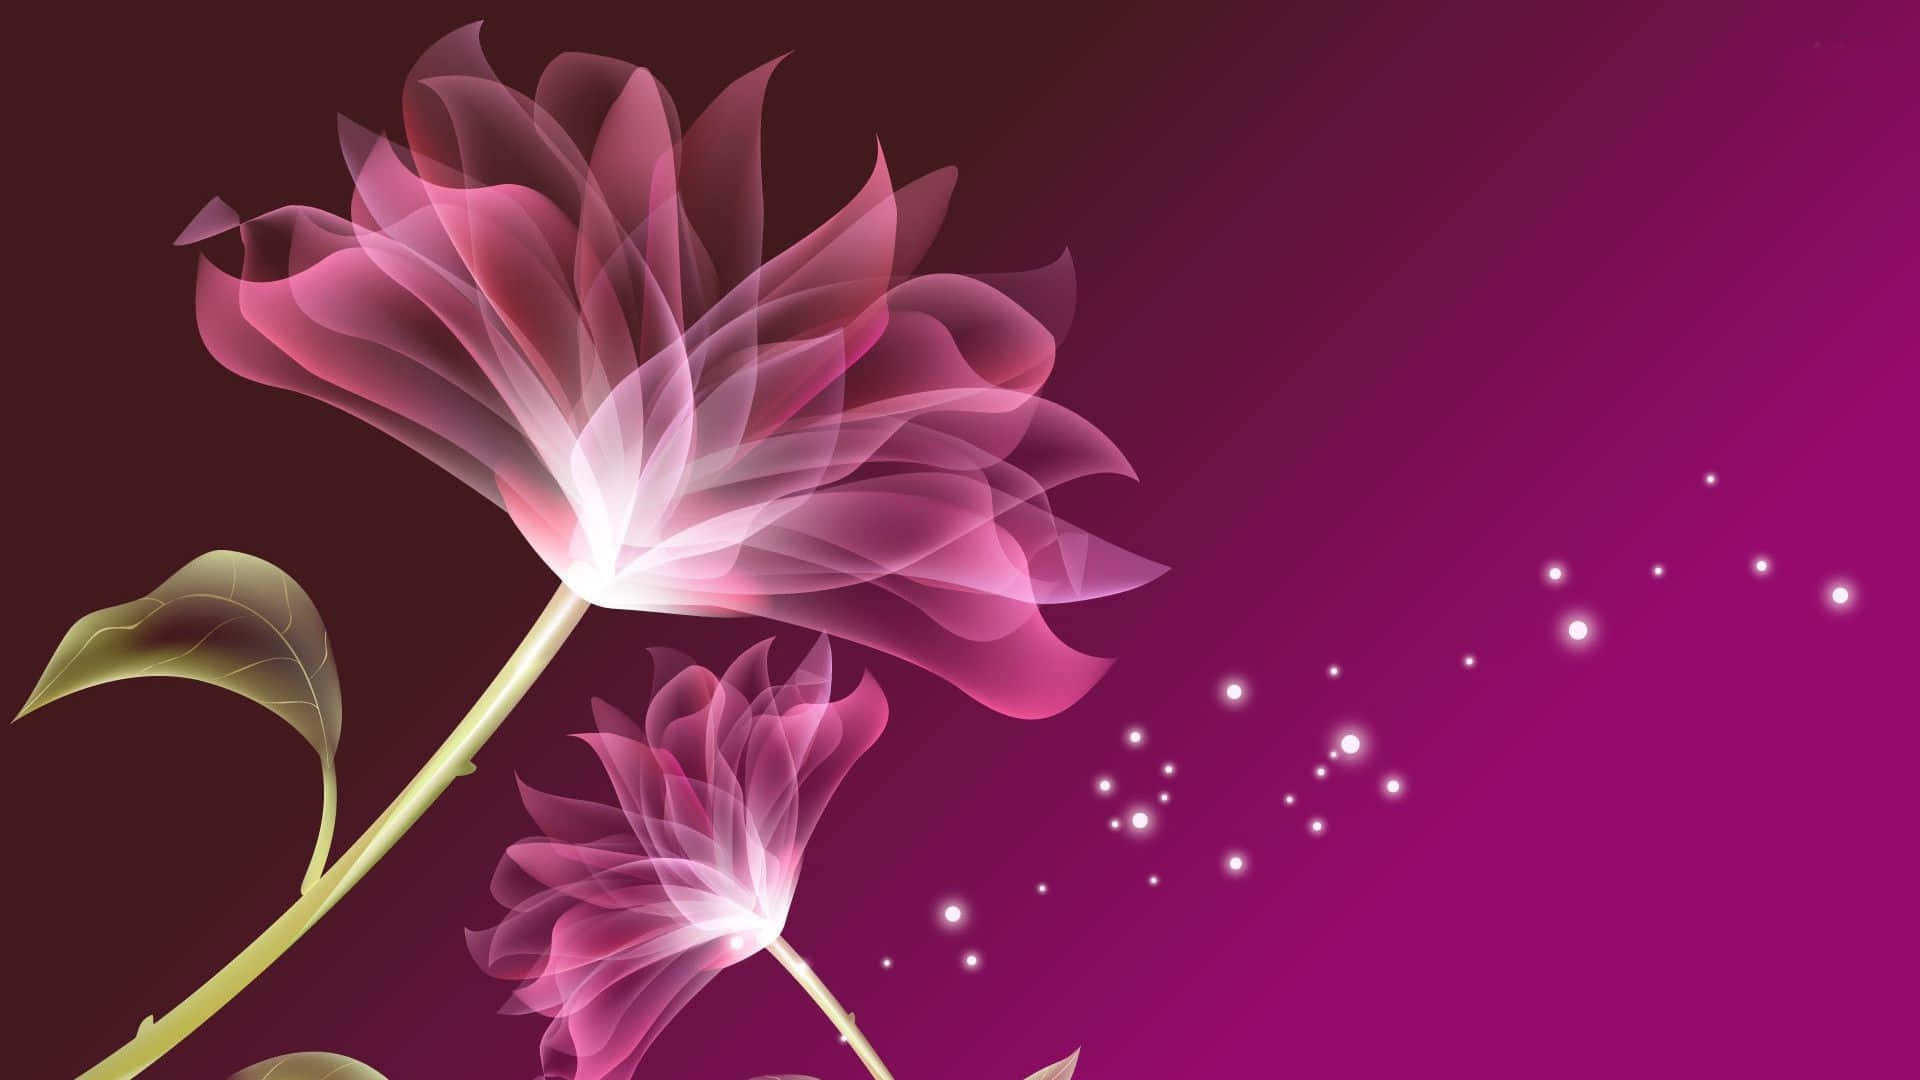 "Stunning Flower Art Composition Featuring a Colorful Array of Blooms" Wallpaper